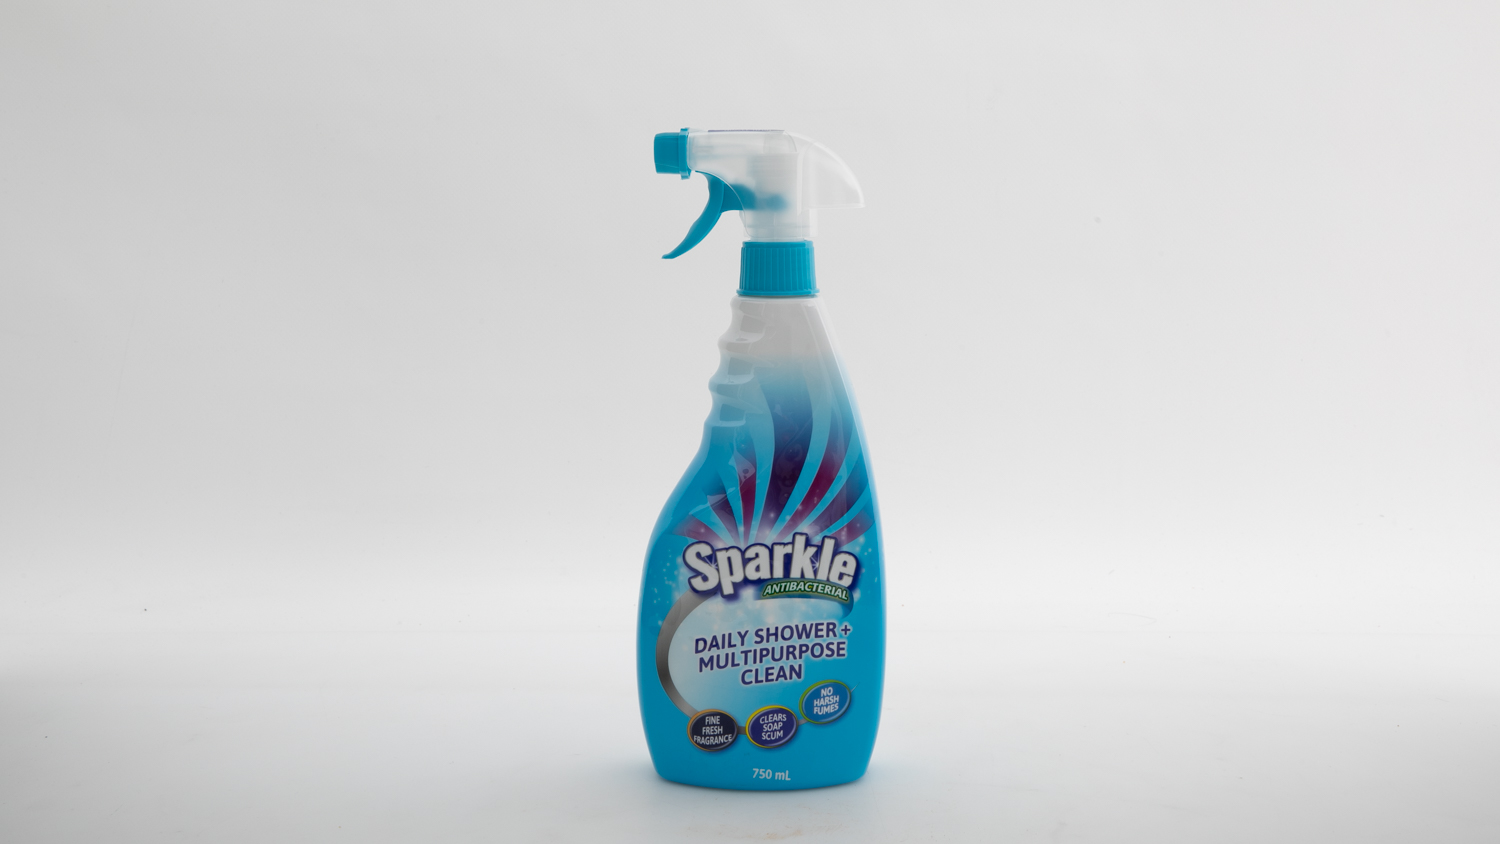 Sparkle Antibacterial Daily Shower & Multipurpose Clean carousel image